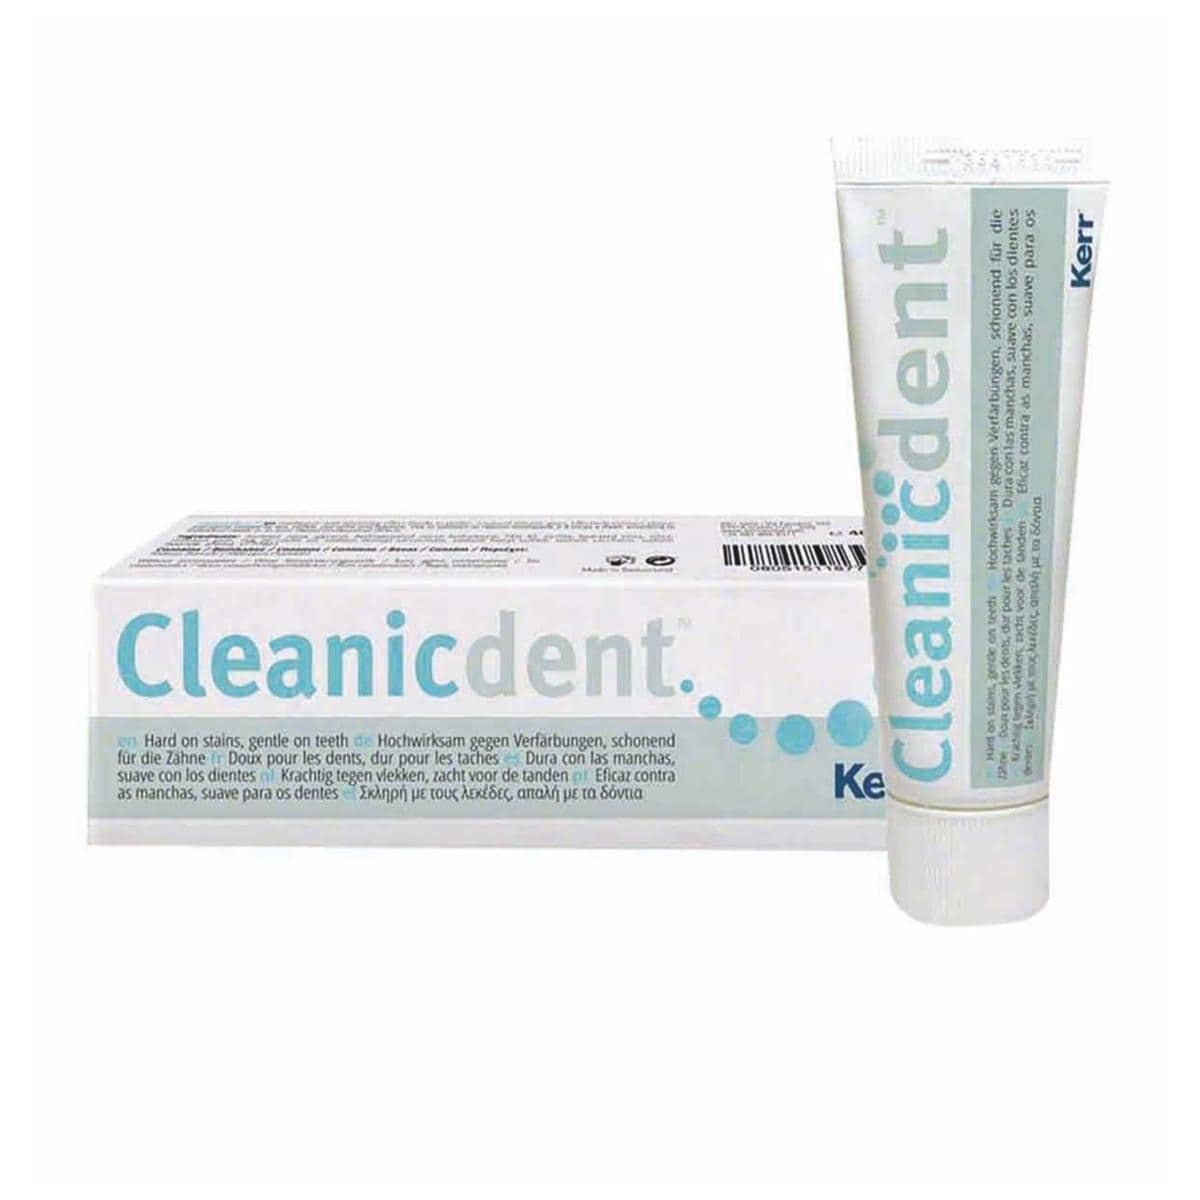 Cleanicdent Whitening Toothpaste 40ml